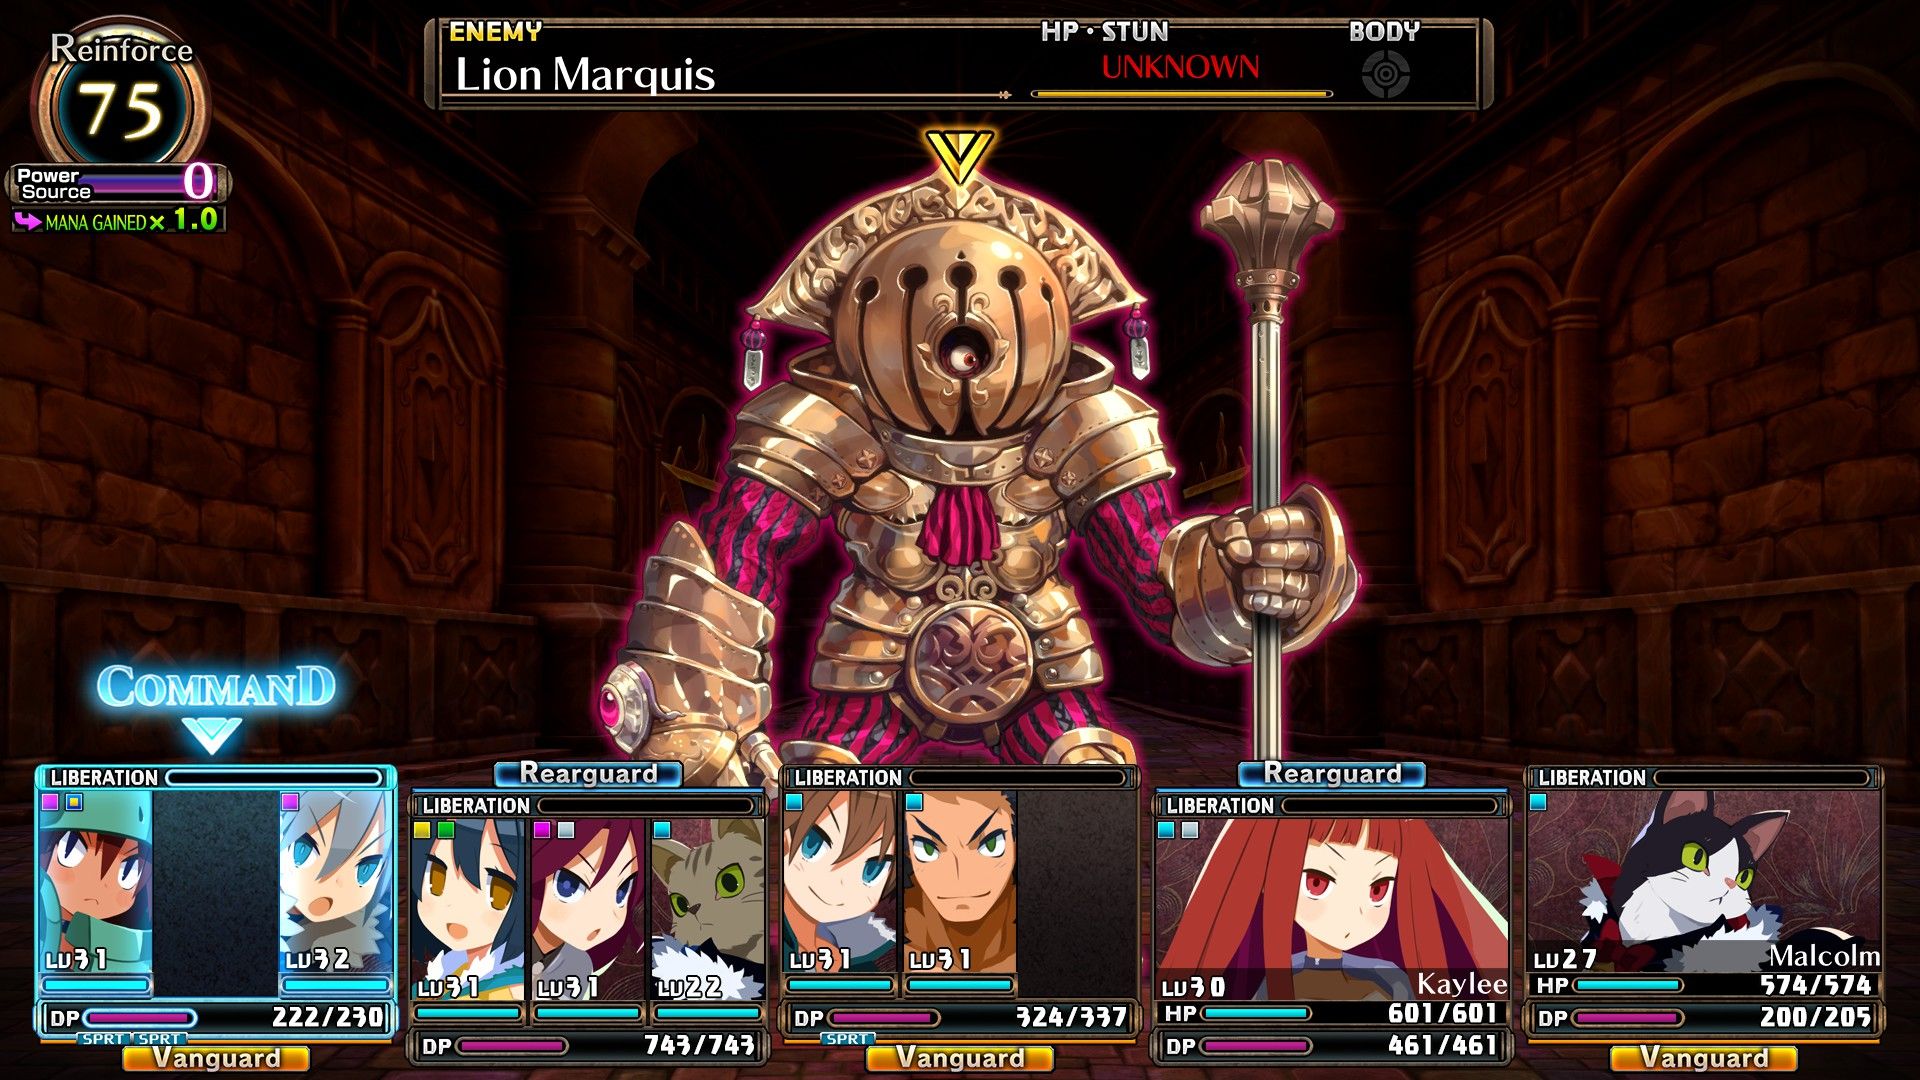 The party prepares multiple actions to play out a round against the Lion Marquis in Labyrinth Of Galleria: The Moon Society.